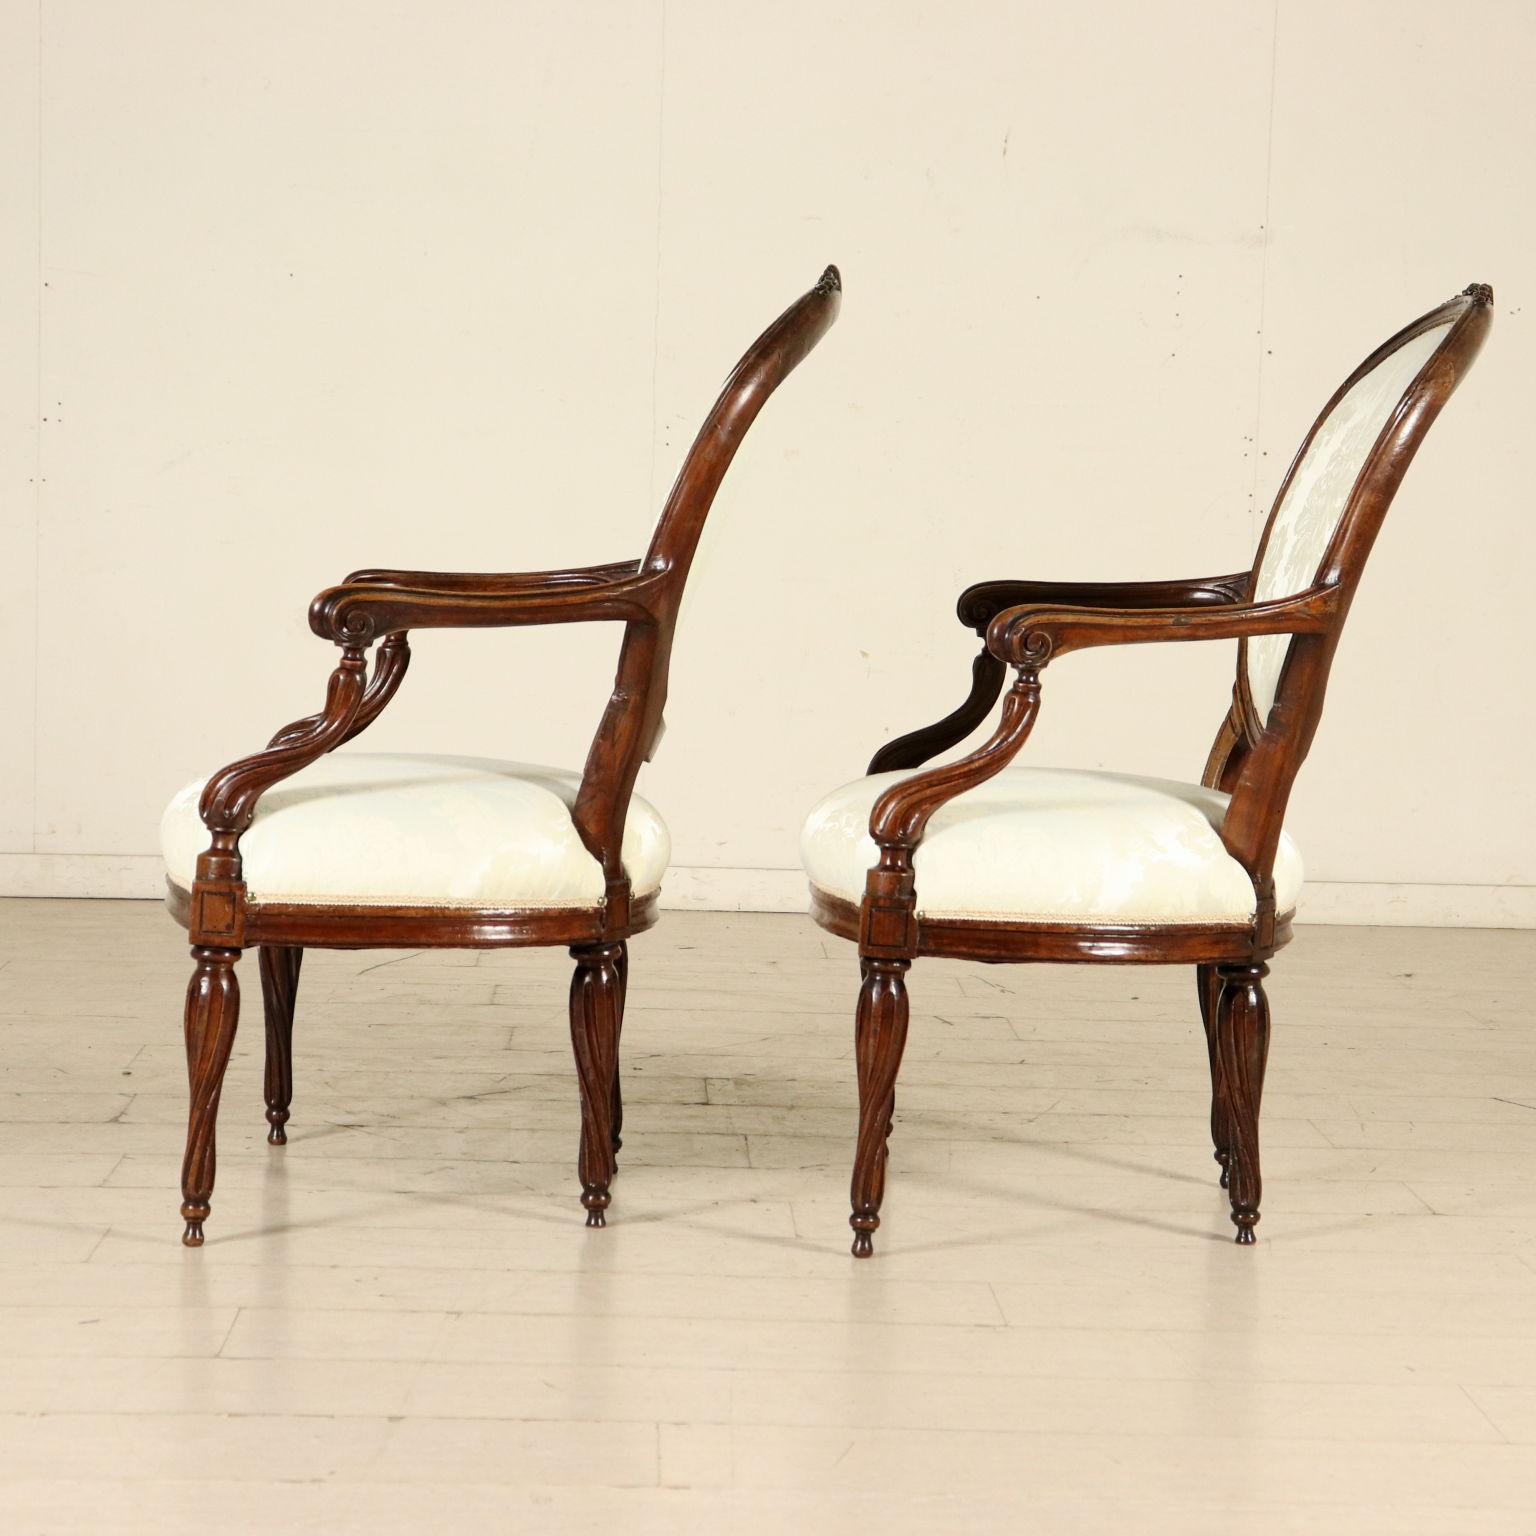 Pair of Armchairs from Genoa Solid Walnut, Italy, 18th Century 5